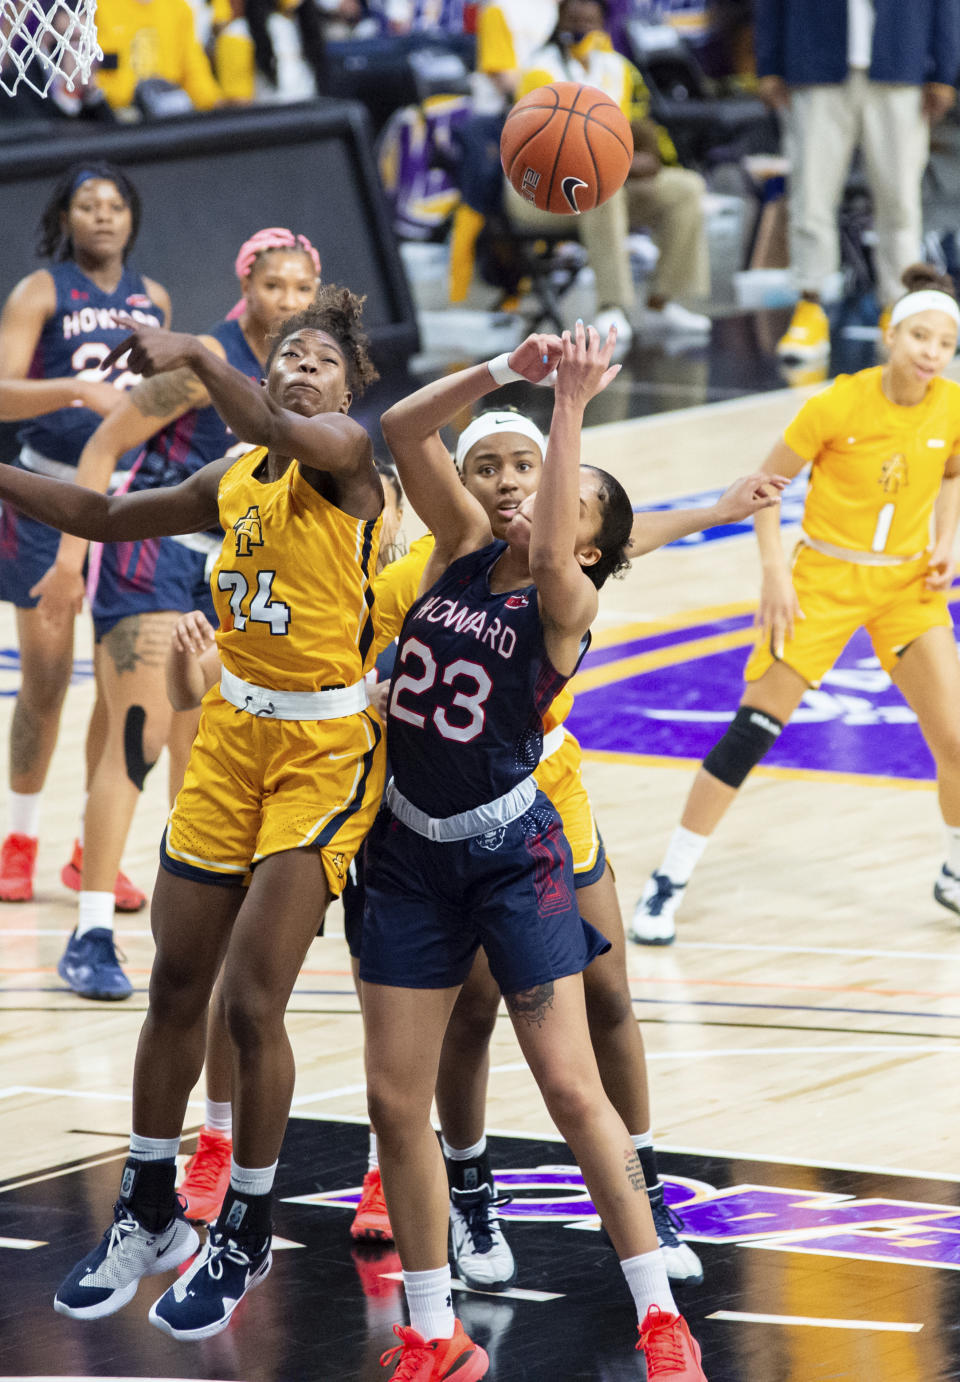 North Carolina A&T's Chanin Scott (24) knocks the ball loose from Howard's Jayla Thornton (23) during the first half of an NCAA college basketball game in the Mid-Eastern Athletic Conference championship Saturday, March 13, 2021, in Norfolk, Va. (AP Photo/Mike Caudill)